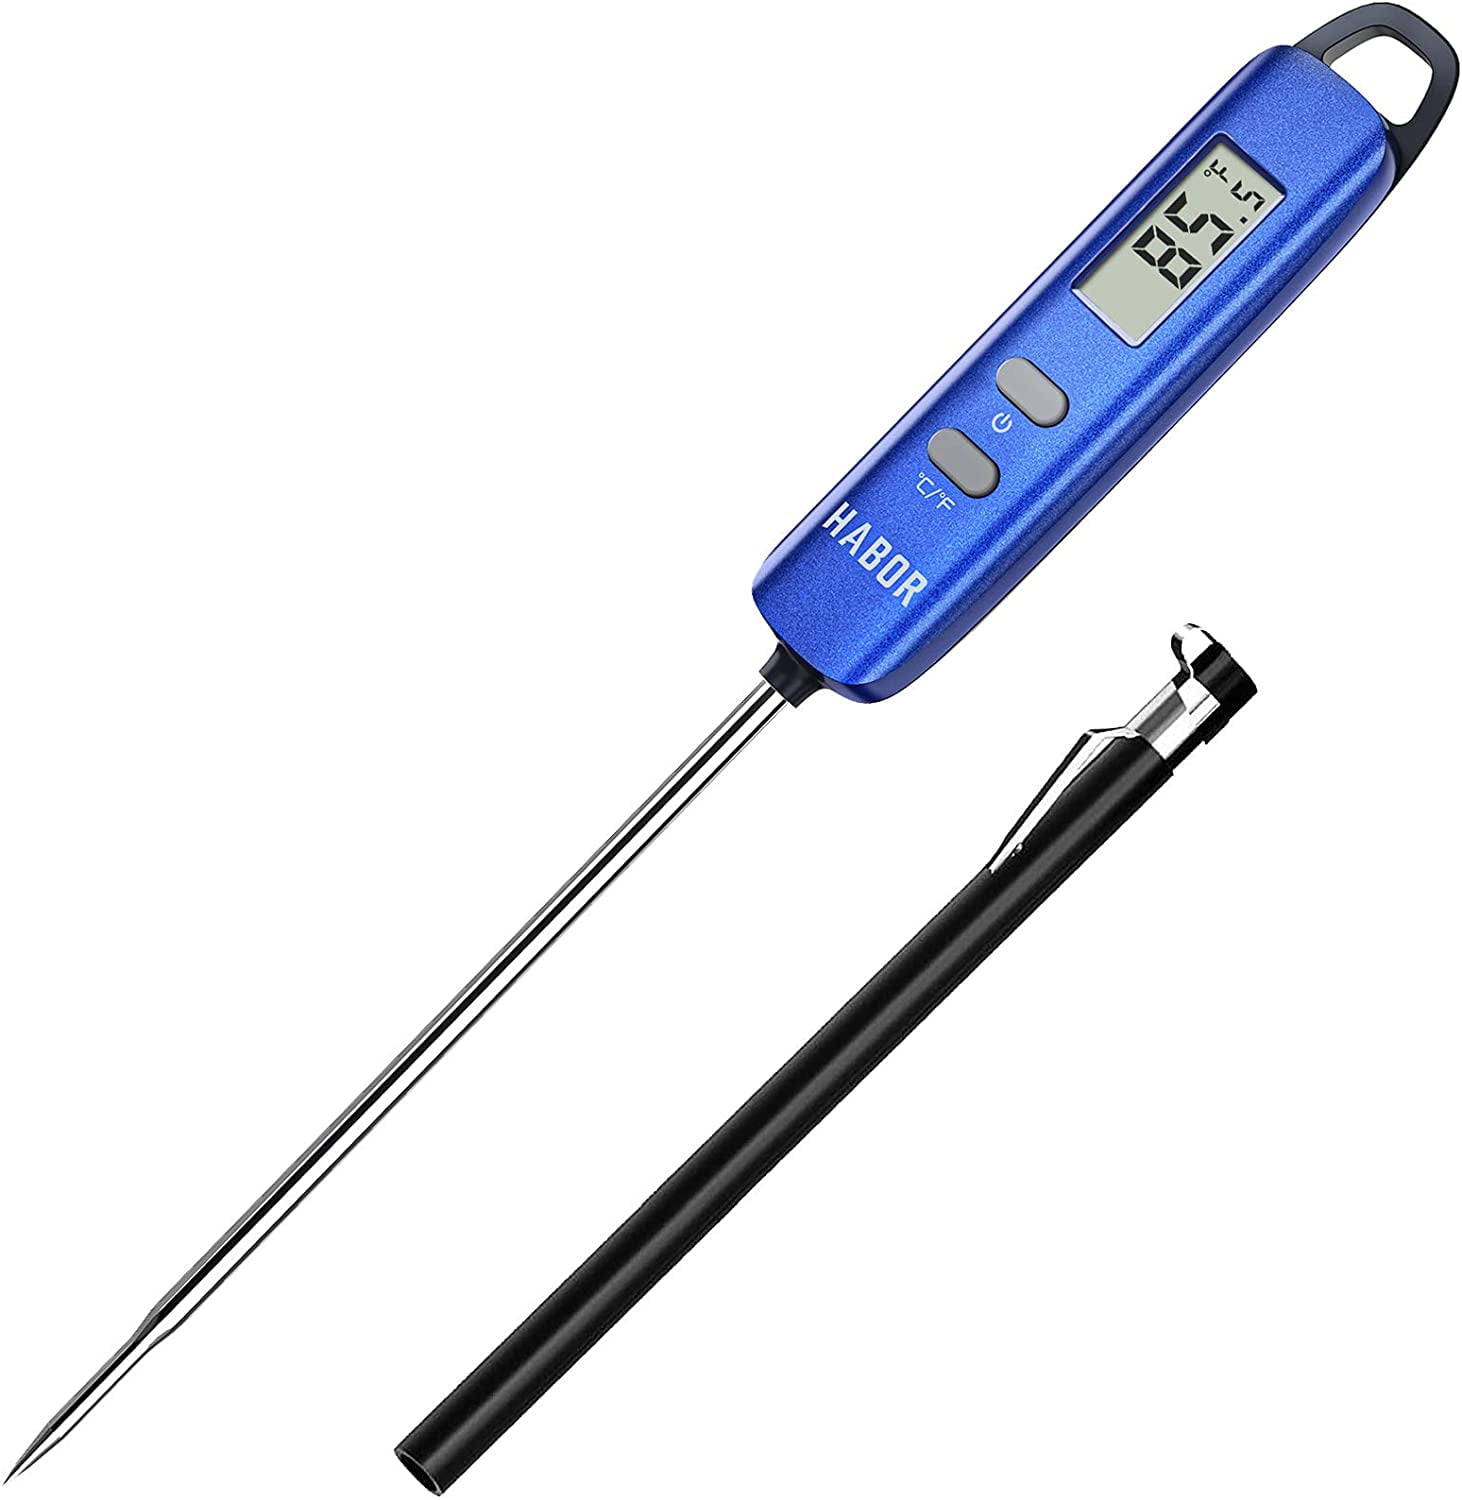 ºF/ºC Grill Auto-off for Food Hanging Hole Yogurt Turkey Milk 5.5 Long Probe Sugar Habor Digital Cooking Thermometer Wine Meat Thermometer BBQ Instant Read Kitchen Thermometer Water 